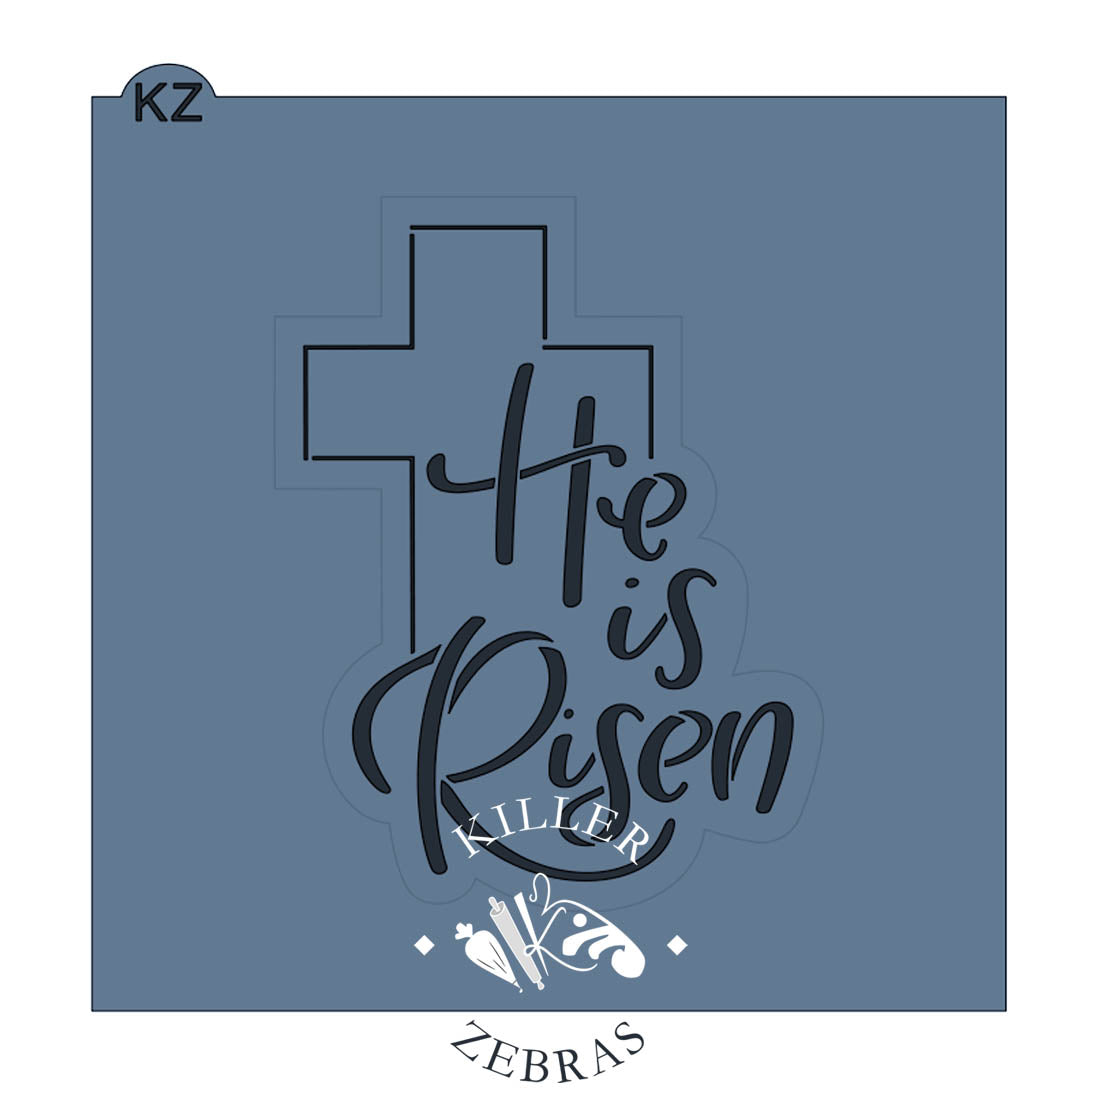 He Is Risen Hand Lettered